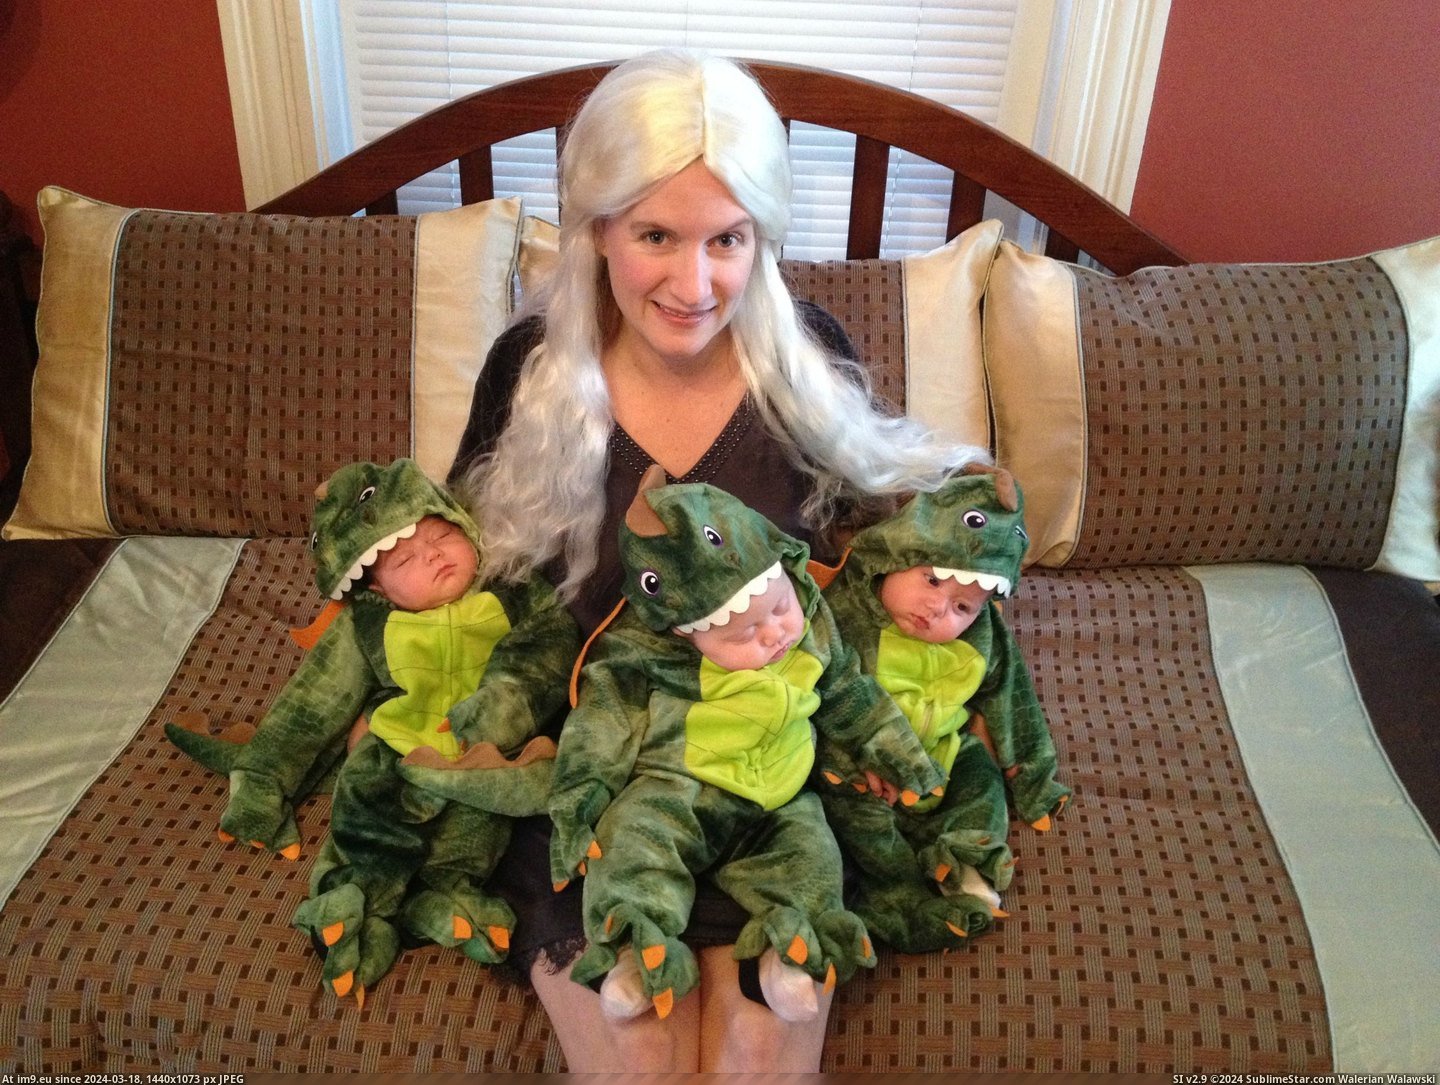 #For #Year #Sister #Dragons #Triplets #Had #Halloween #Queen [Pics] My sister had triplets this year...went with Queen of Dragons for Halloween Pic. (Изображение из альбом My r/PICS favs))